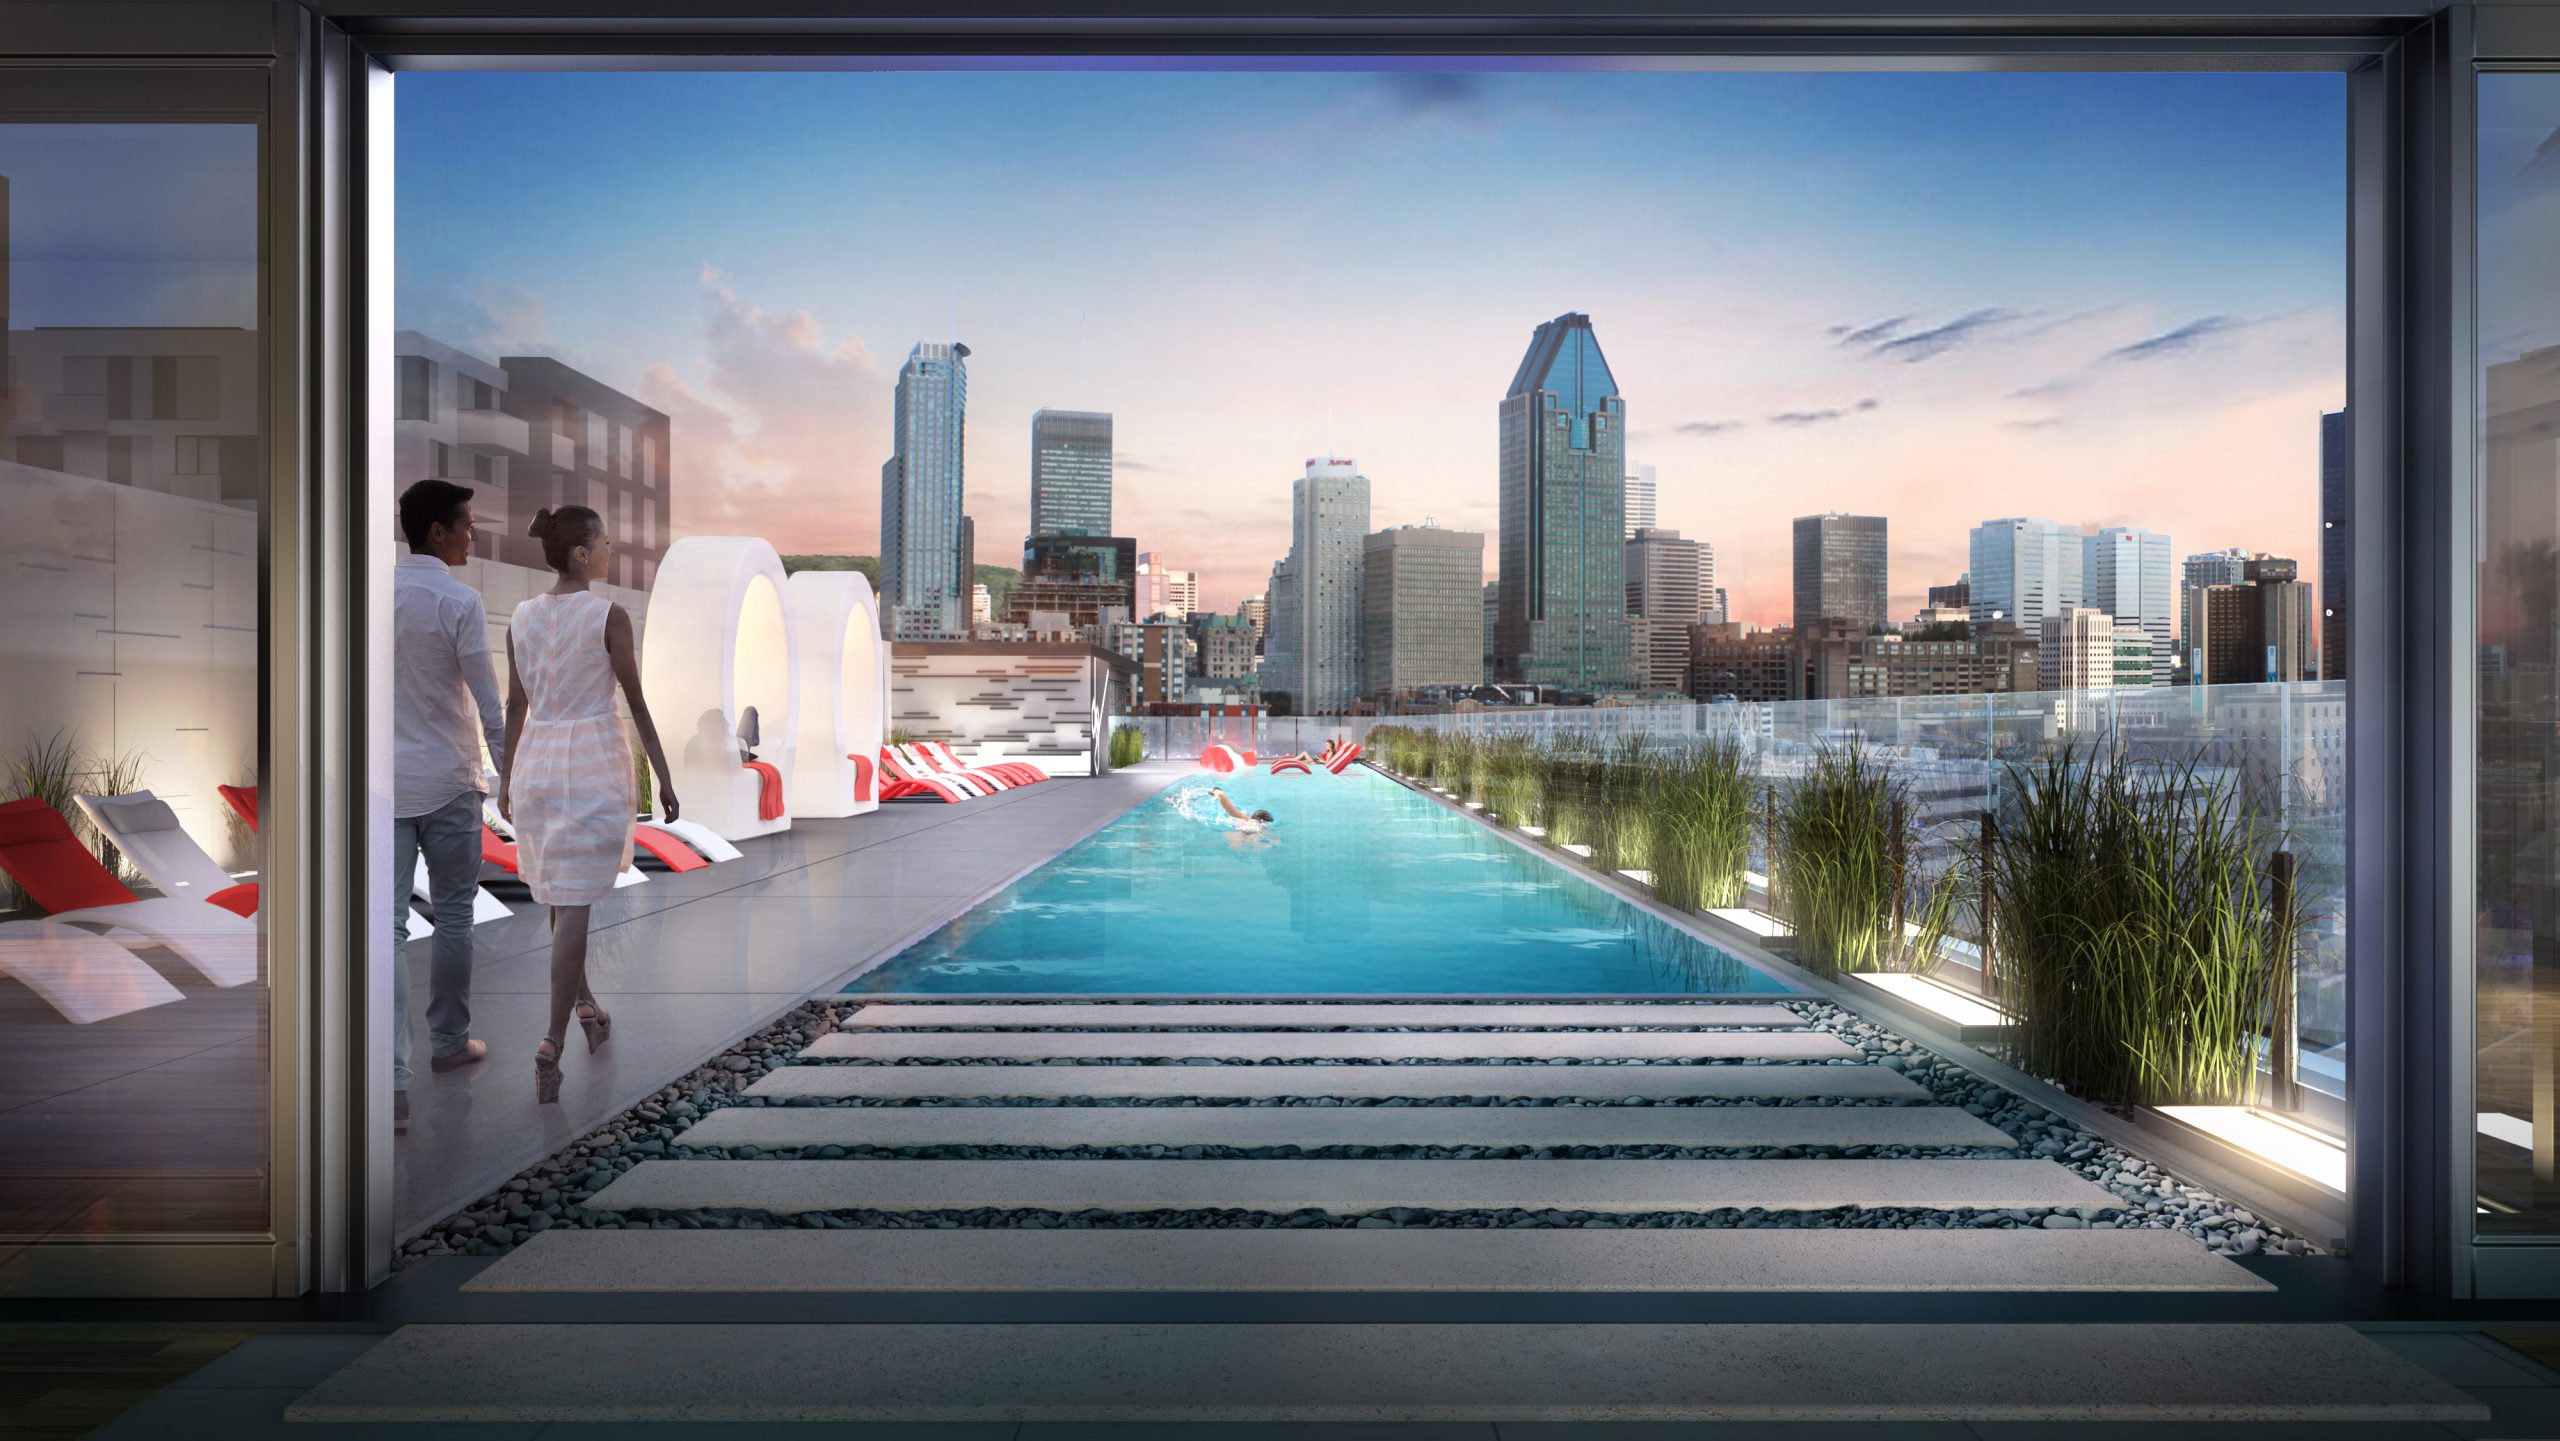 Did you know? the LONGEST SWIMMING POOL IN GRIFFINTOWN will be in District Griffin sur le Parc!